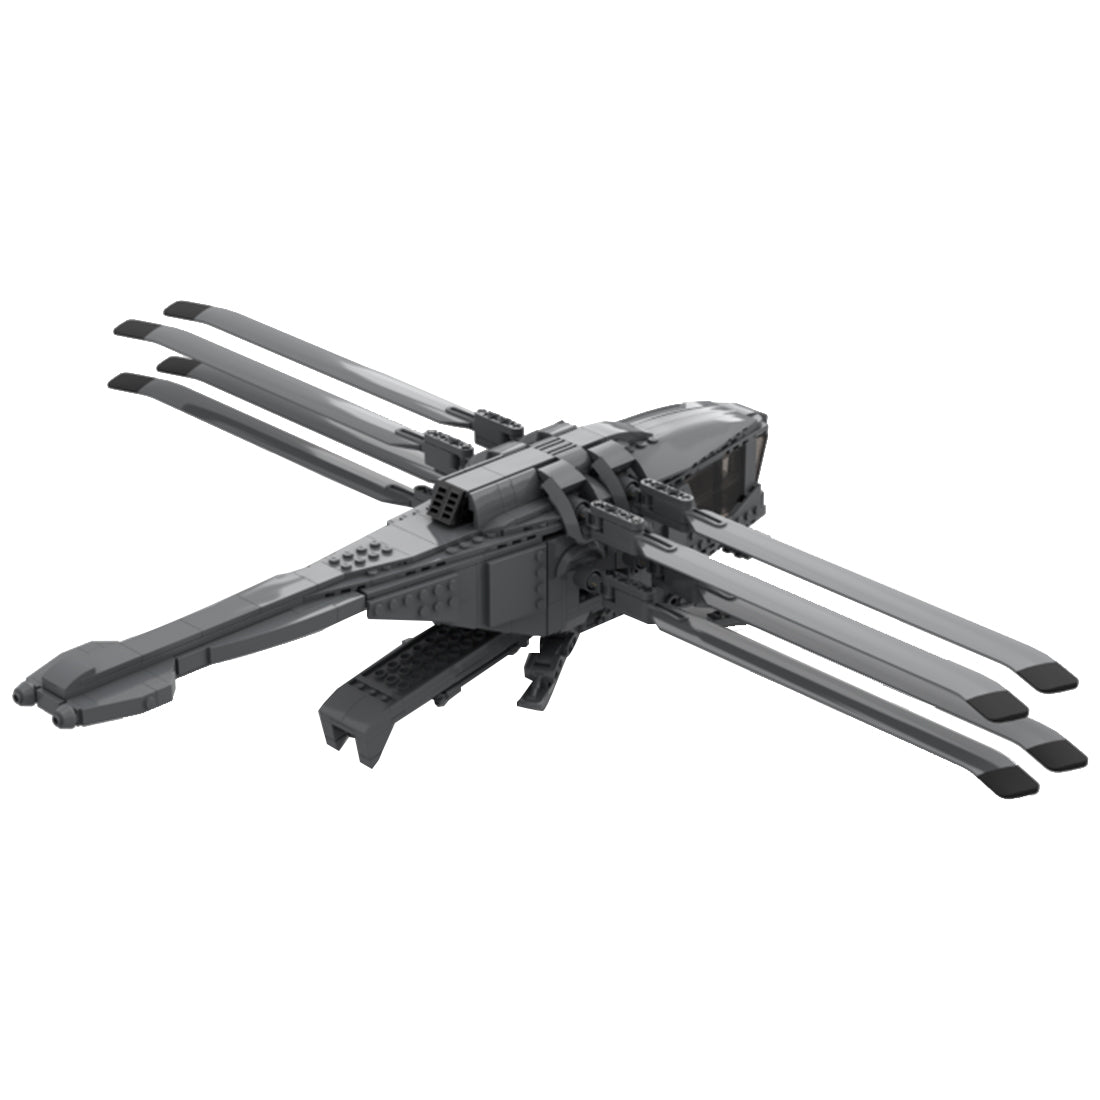 MOC-93682 Science Fiction Style Imperial Ornithopter Model